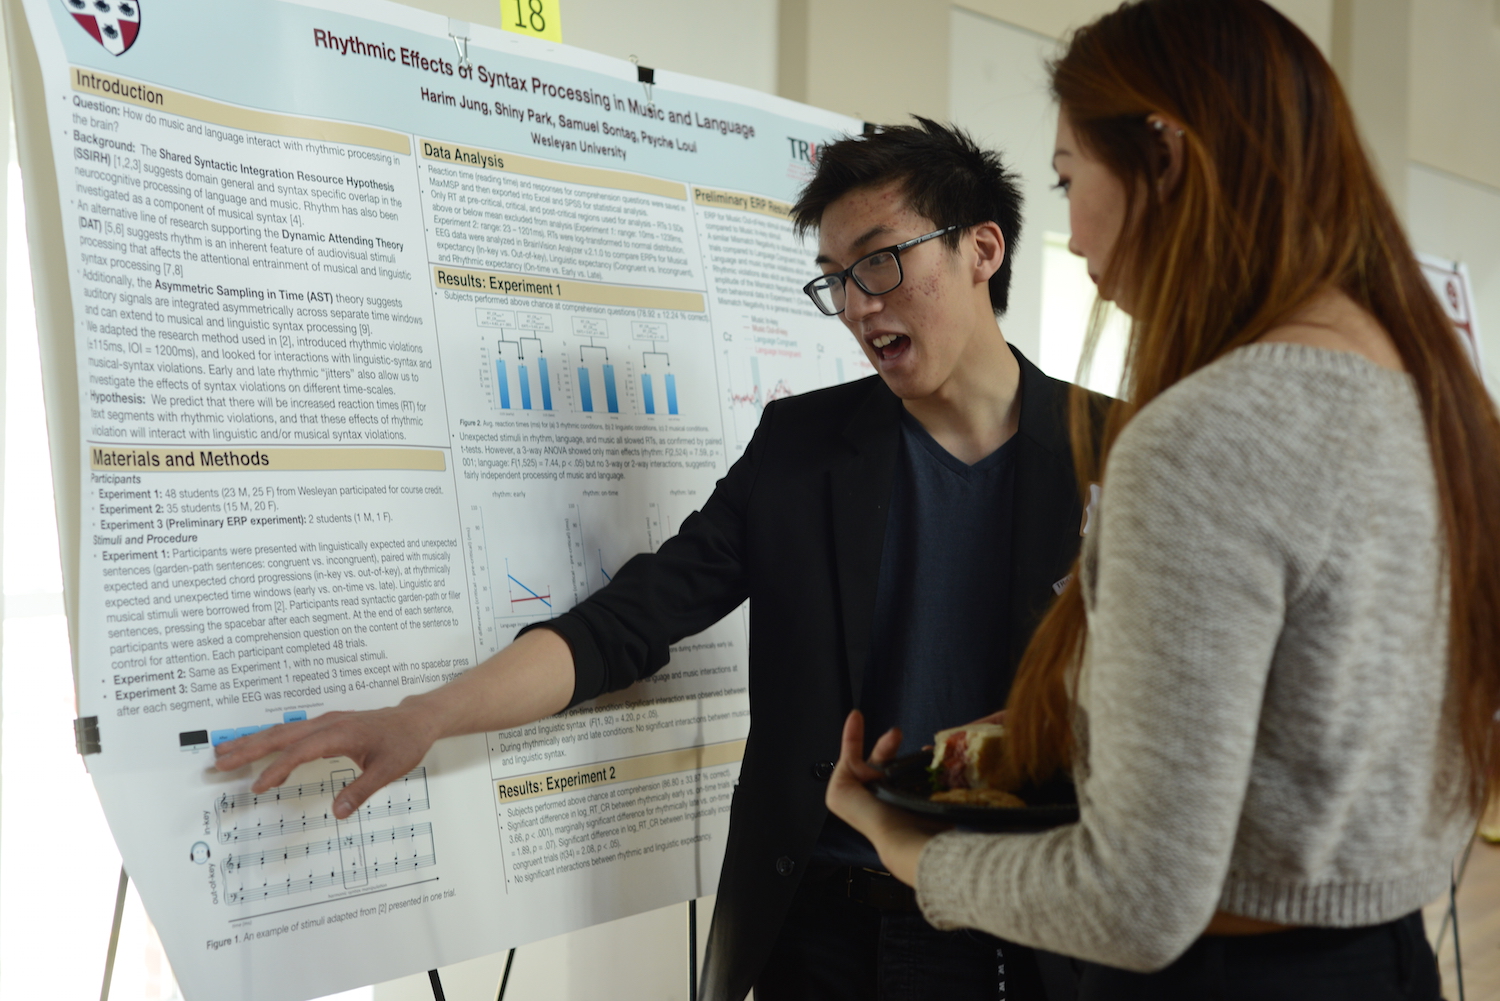 Harim Jung '16 discusses his research "Rhythmic Effects of Syntax Processing in Music and Language," with BA/MA student Victoria Fong.